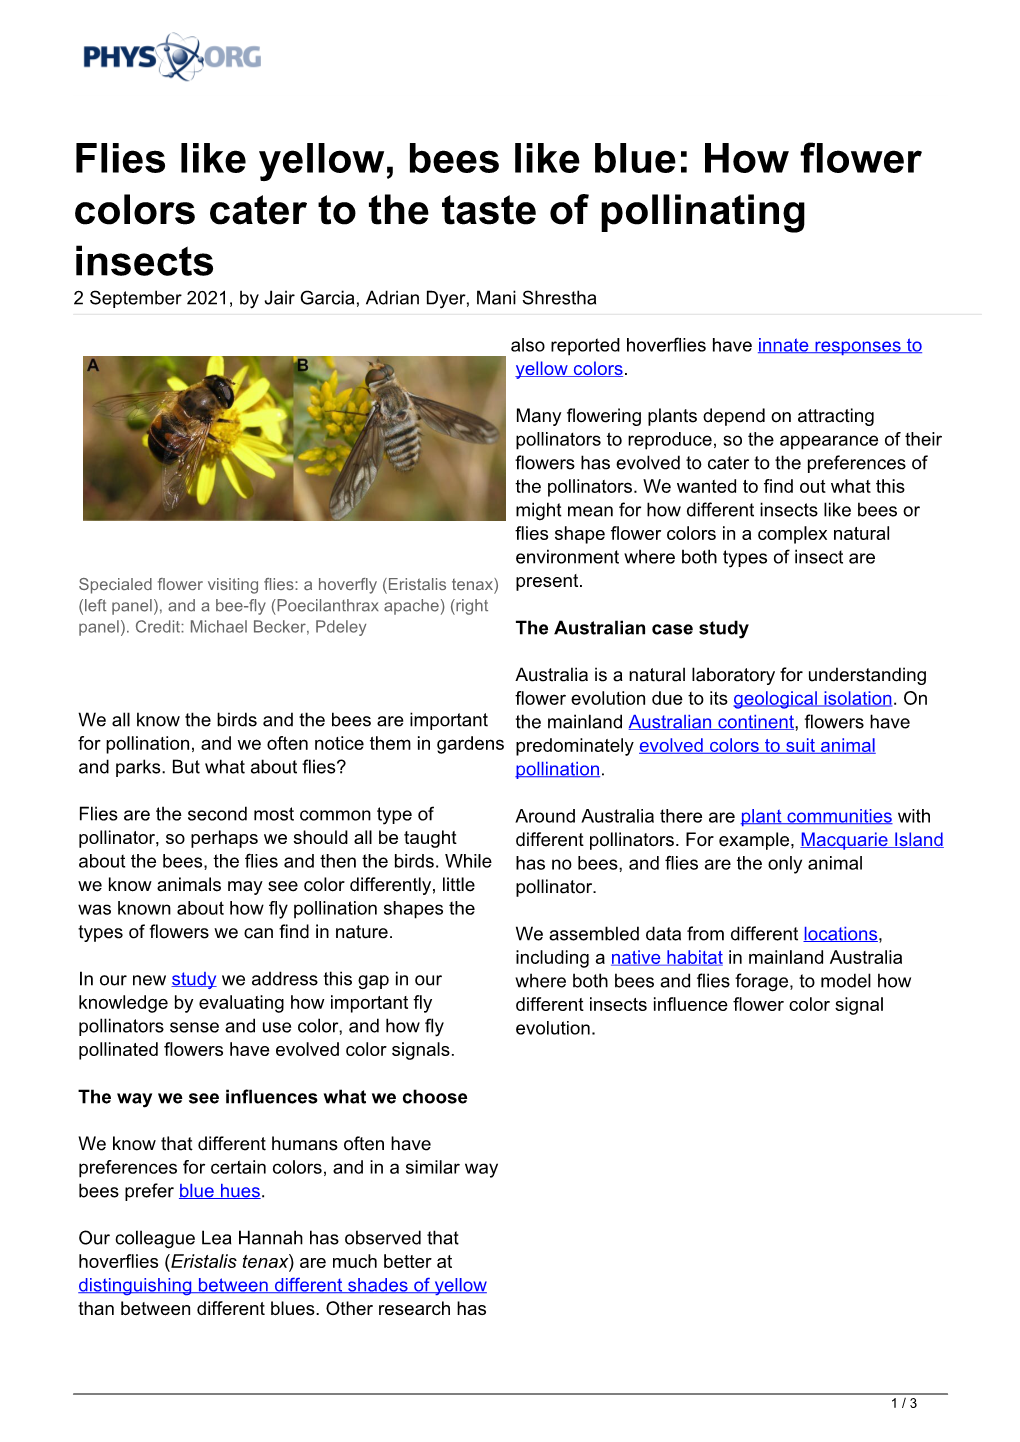 How Flower Colors Cater to the Taste of Pollinating Insects 2 September 2021, by Jair Garcia, Adrian Dyer, Mani Shrestha